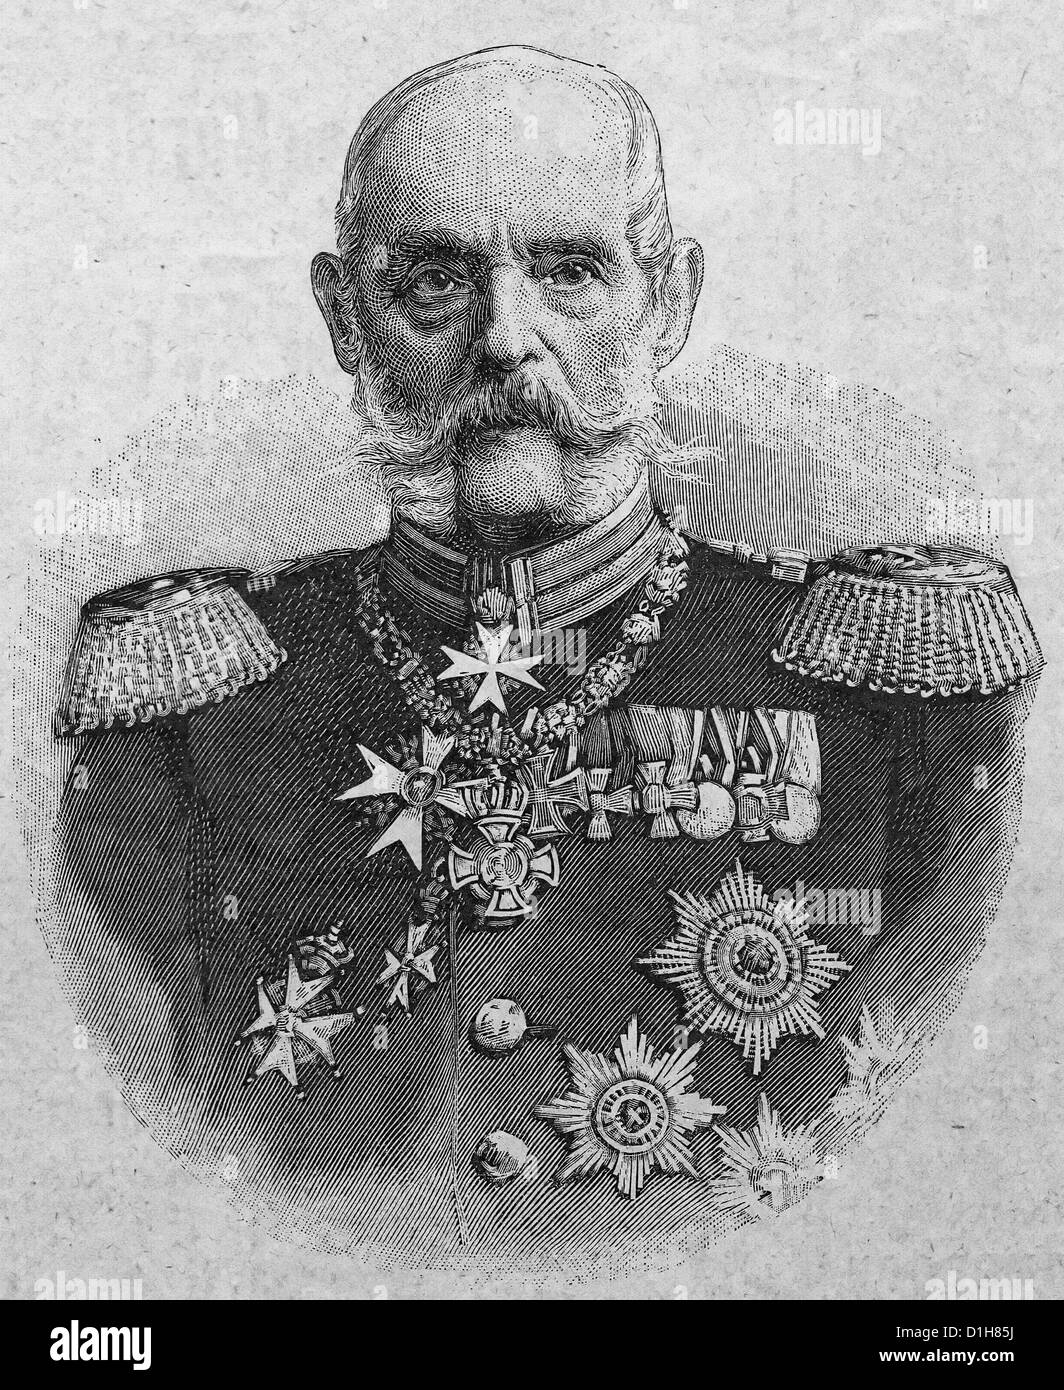 General Von Pape - Alexander August Wilhelm von Pape (February 2, 1813 – May 7, 1895) was a Royal Prussian infantry Colonel-General with the special rank of Generalfeldmarschall. Stock Photo